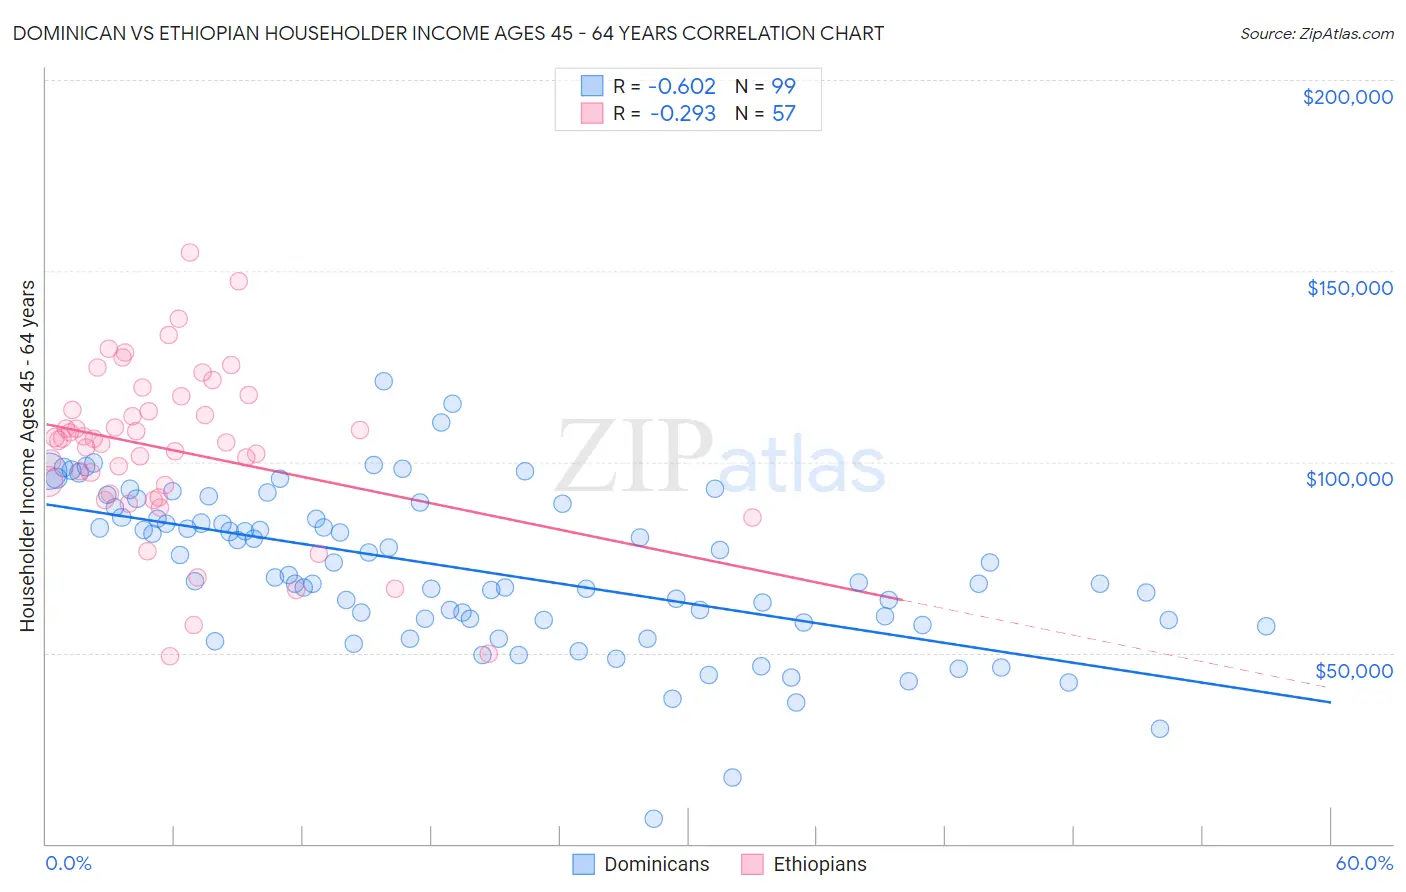 Dominican vs Ethiopian Householder Income Ages 45 - 64 years